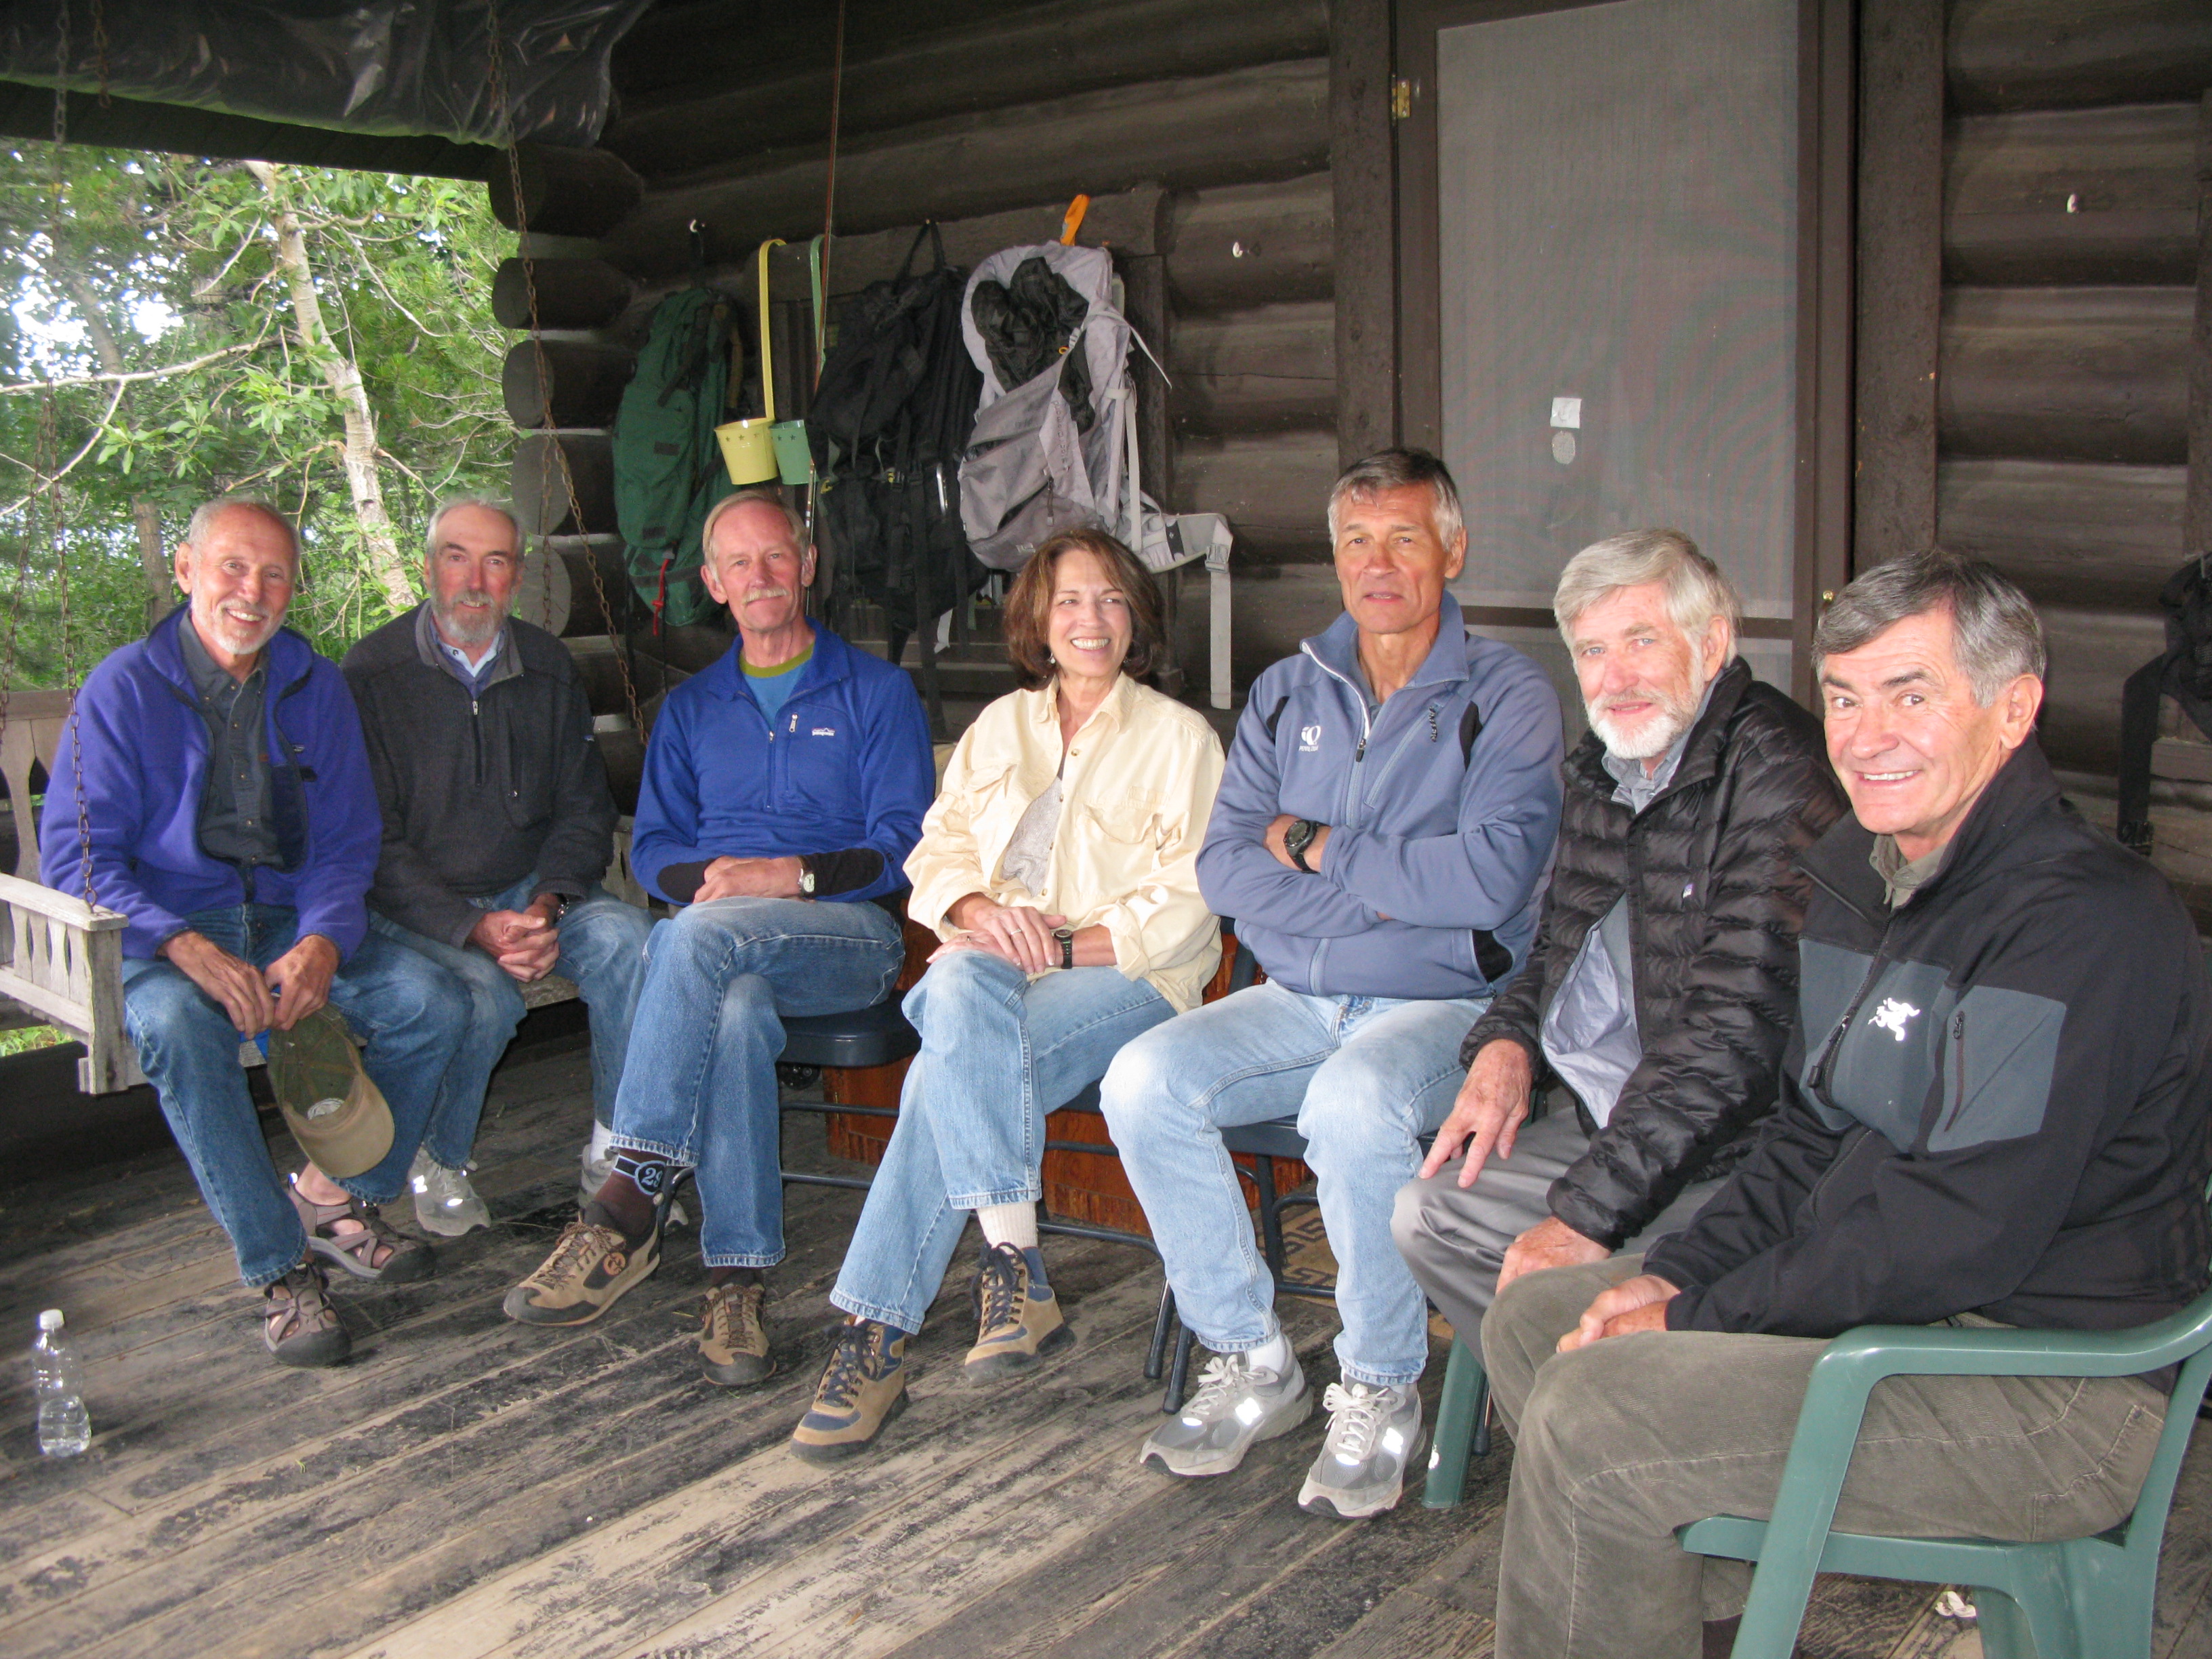 Modern day rescuers with rescued climber:  Rick Reese, Pete Sinclair, Ralph Tingey, Lorraine McCoy, Mike Ermarth, Bob Irvine, Ted Wilson Photo Credit: John Logan Pierson